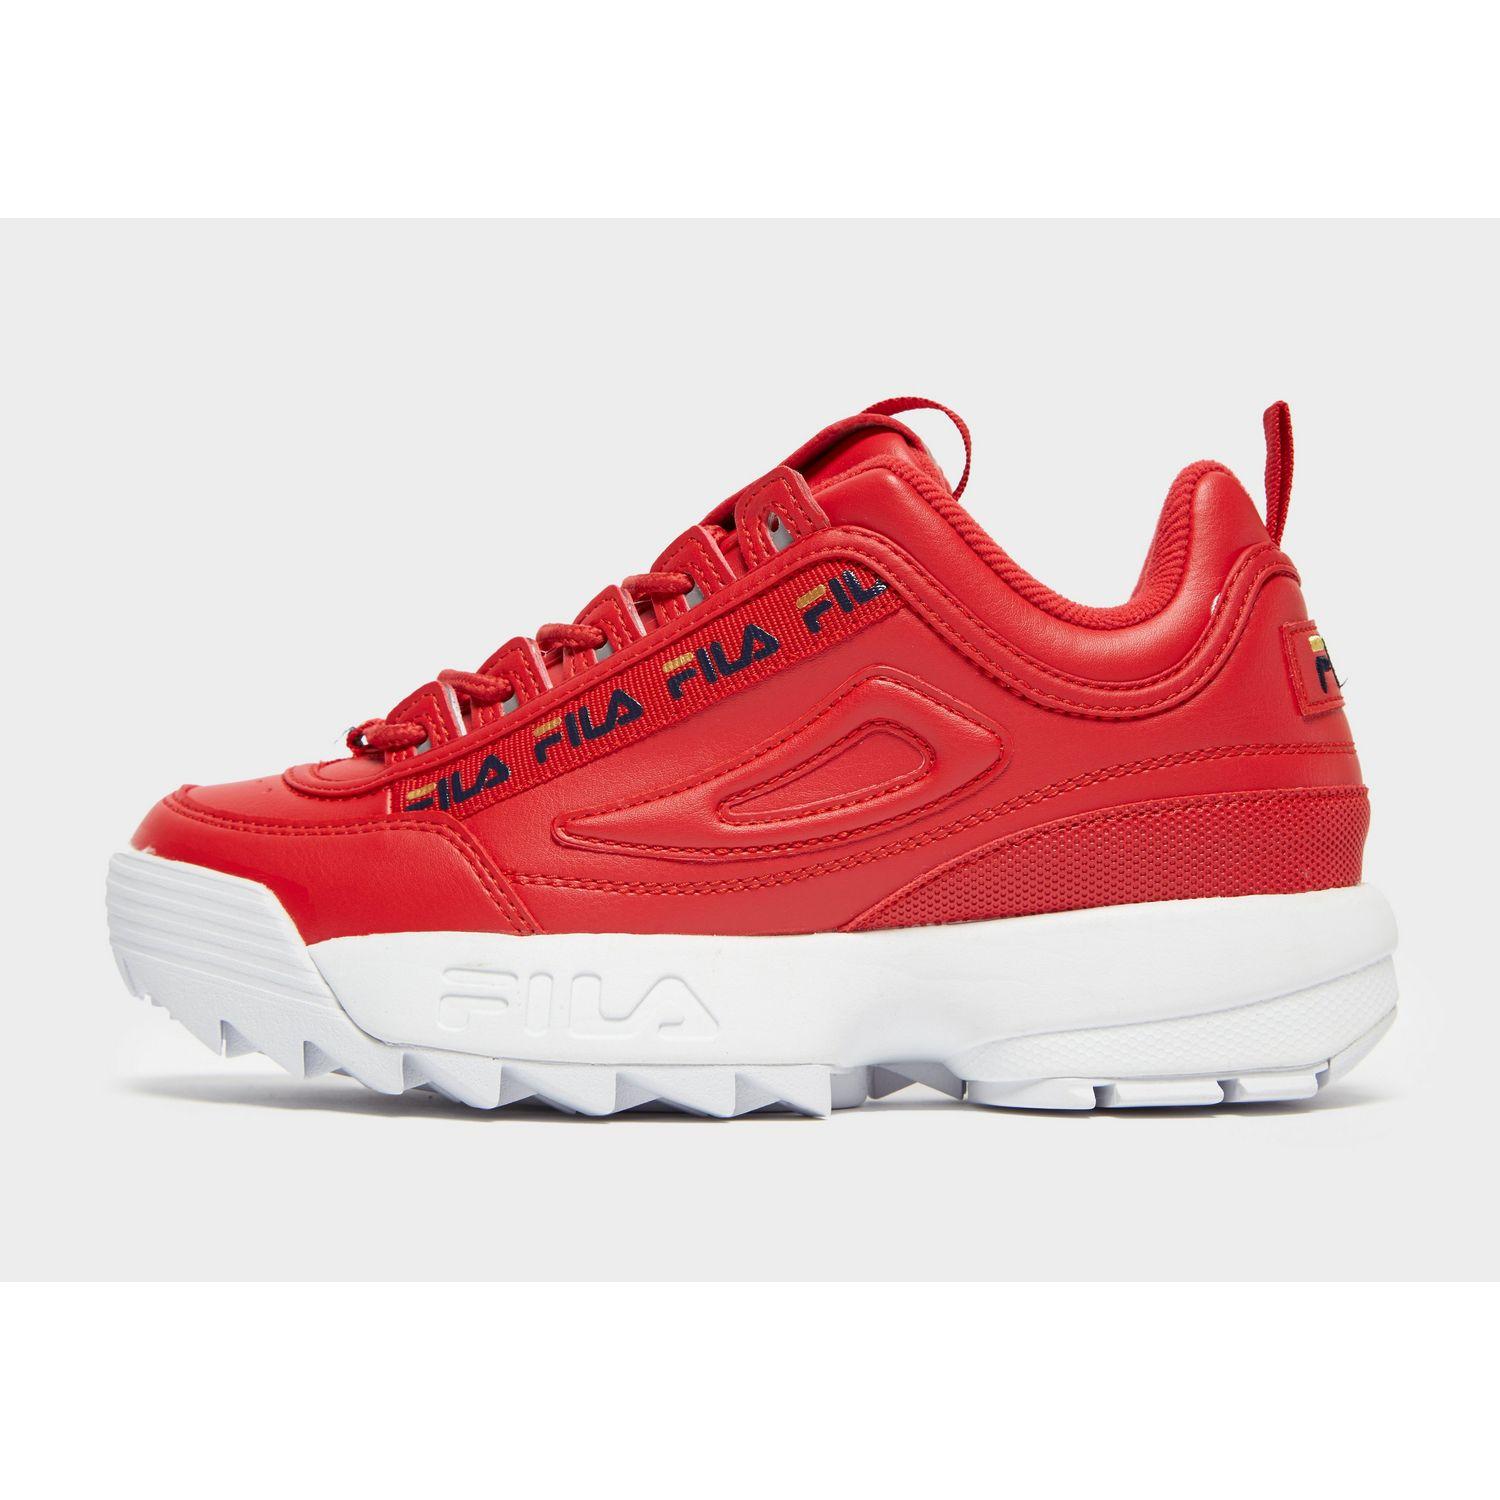 Fila Leather Disruptor Ii in Red/Black (Red) - Lyst